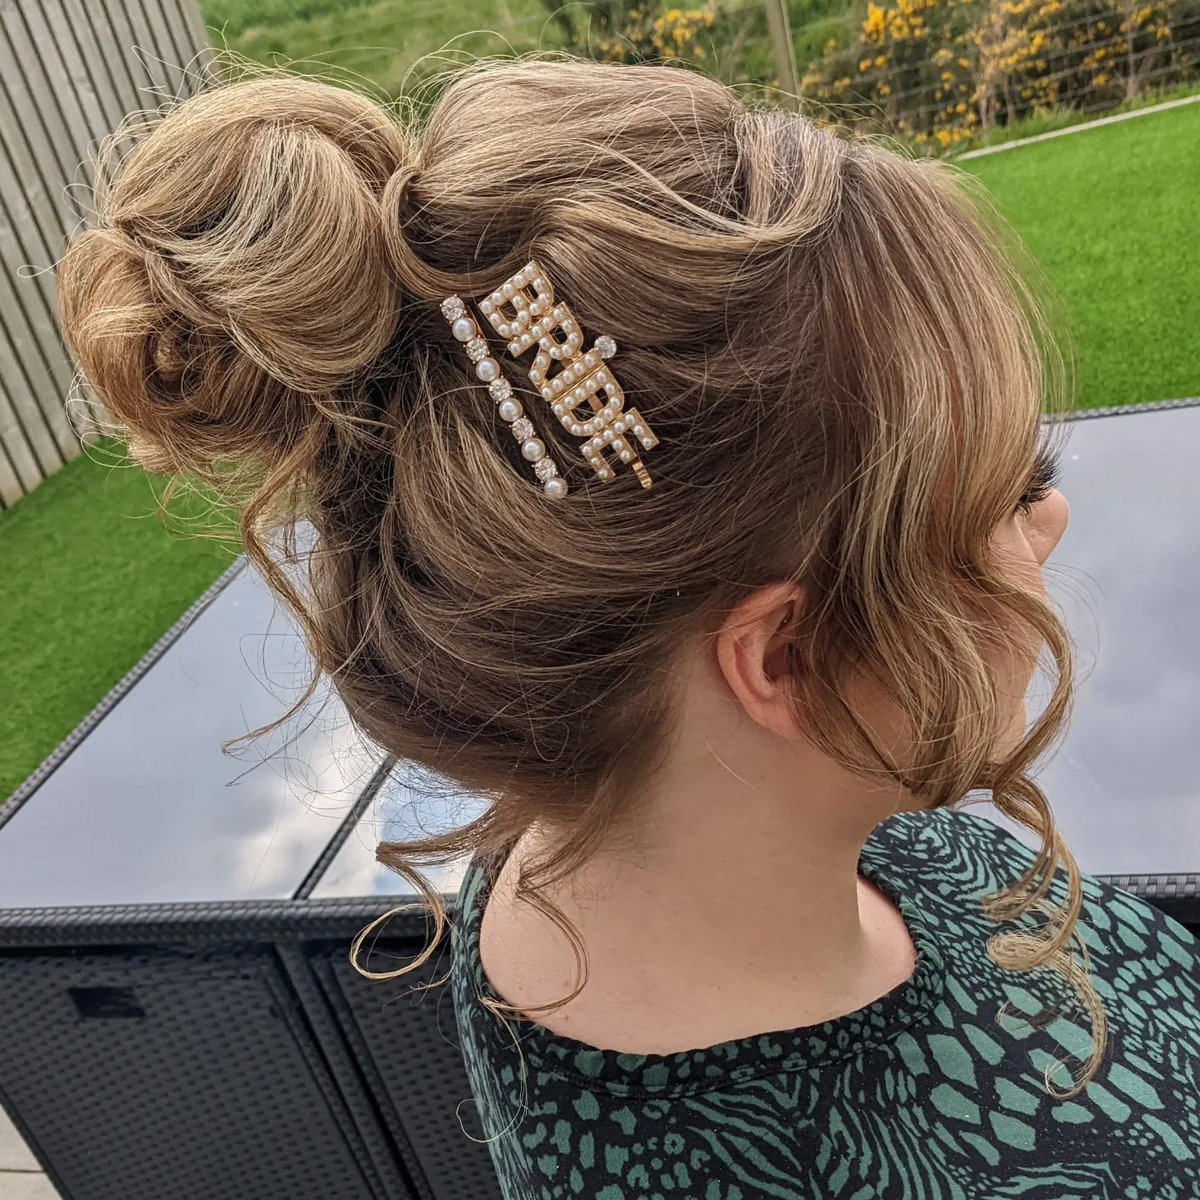 Bun Updo With Hair Accessories